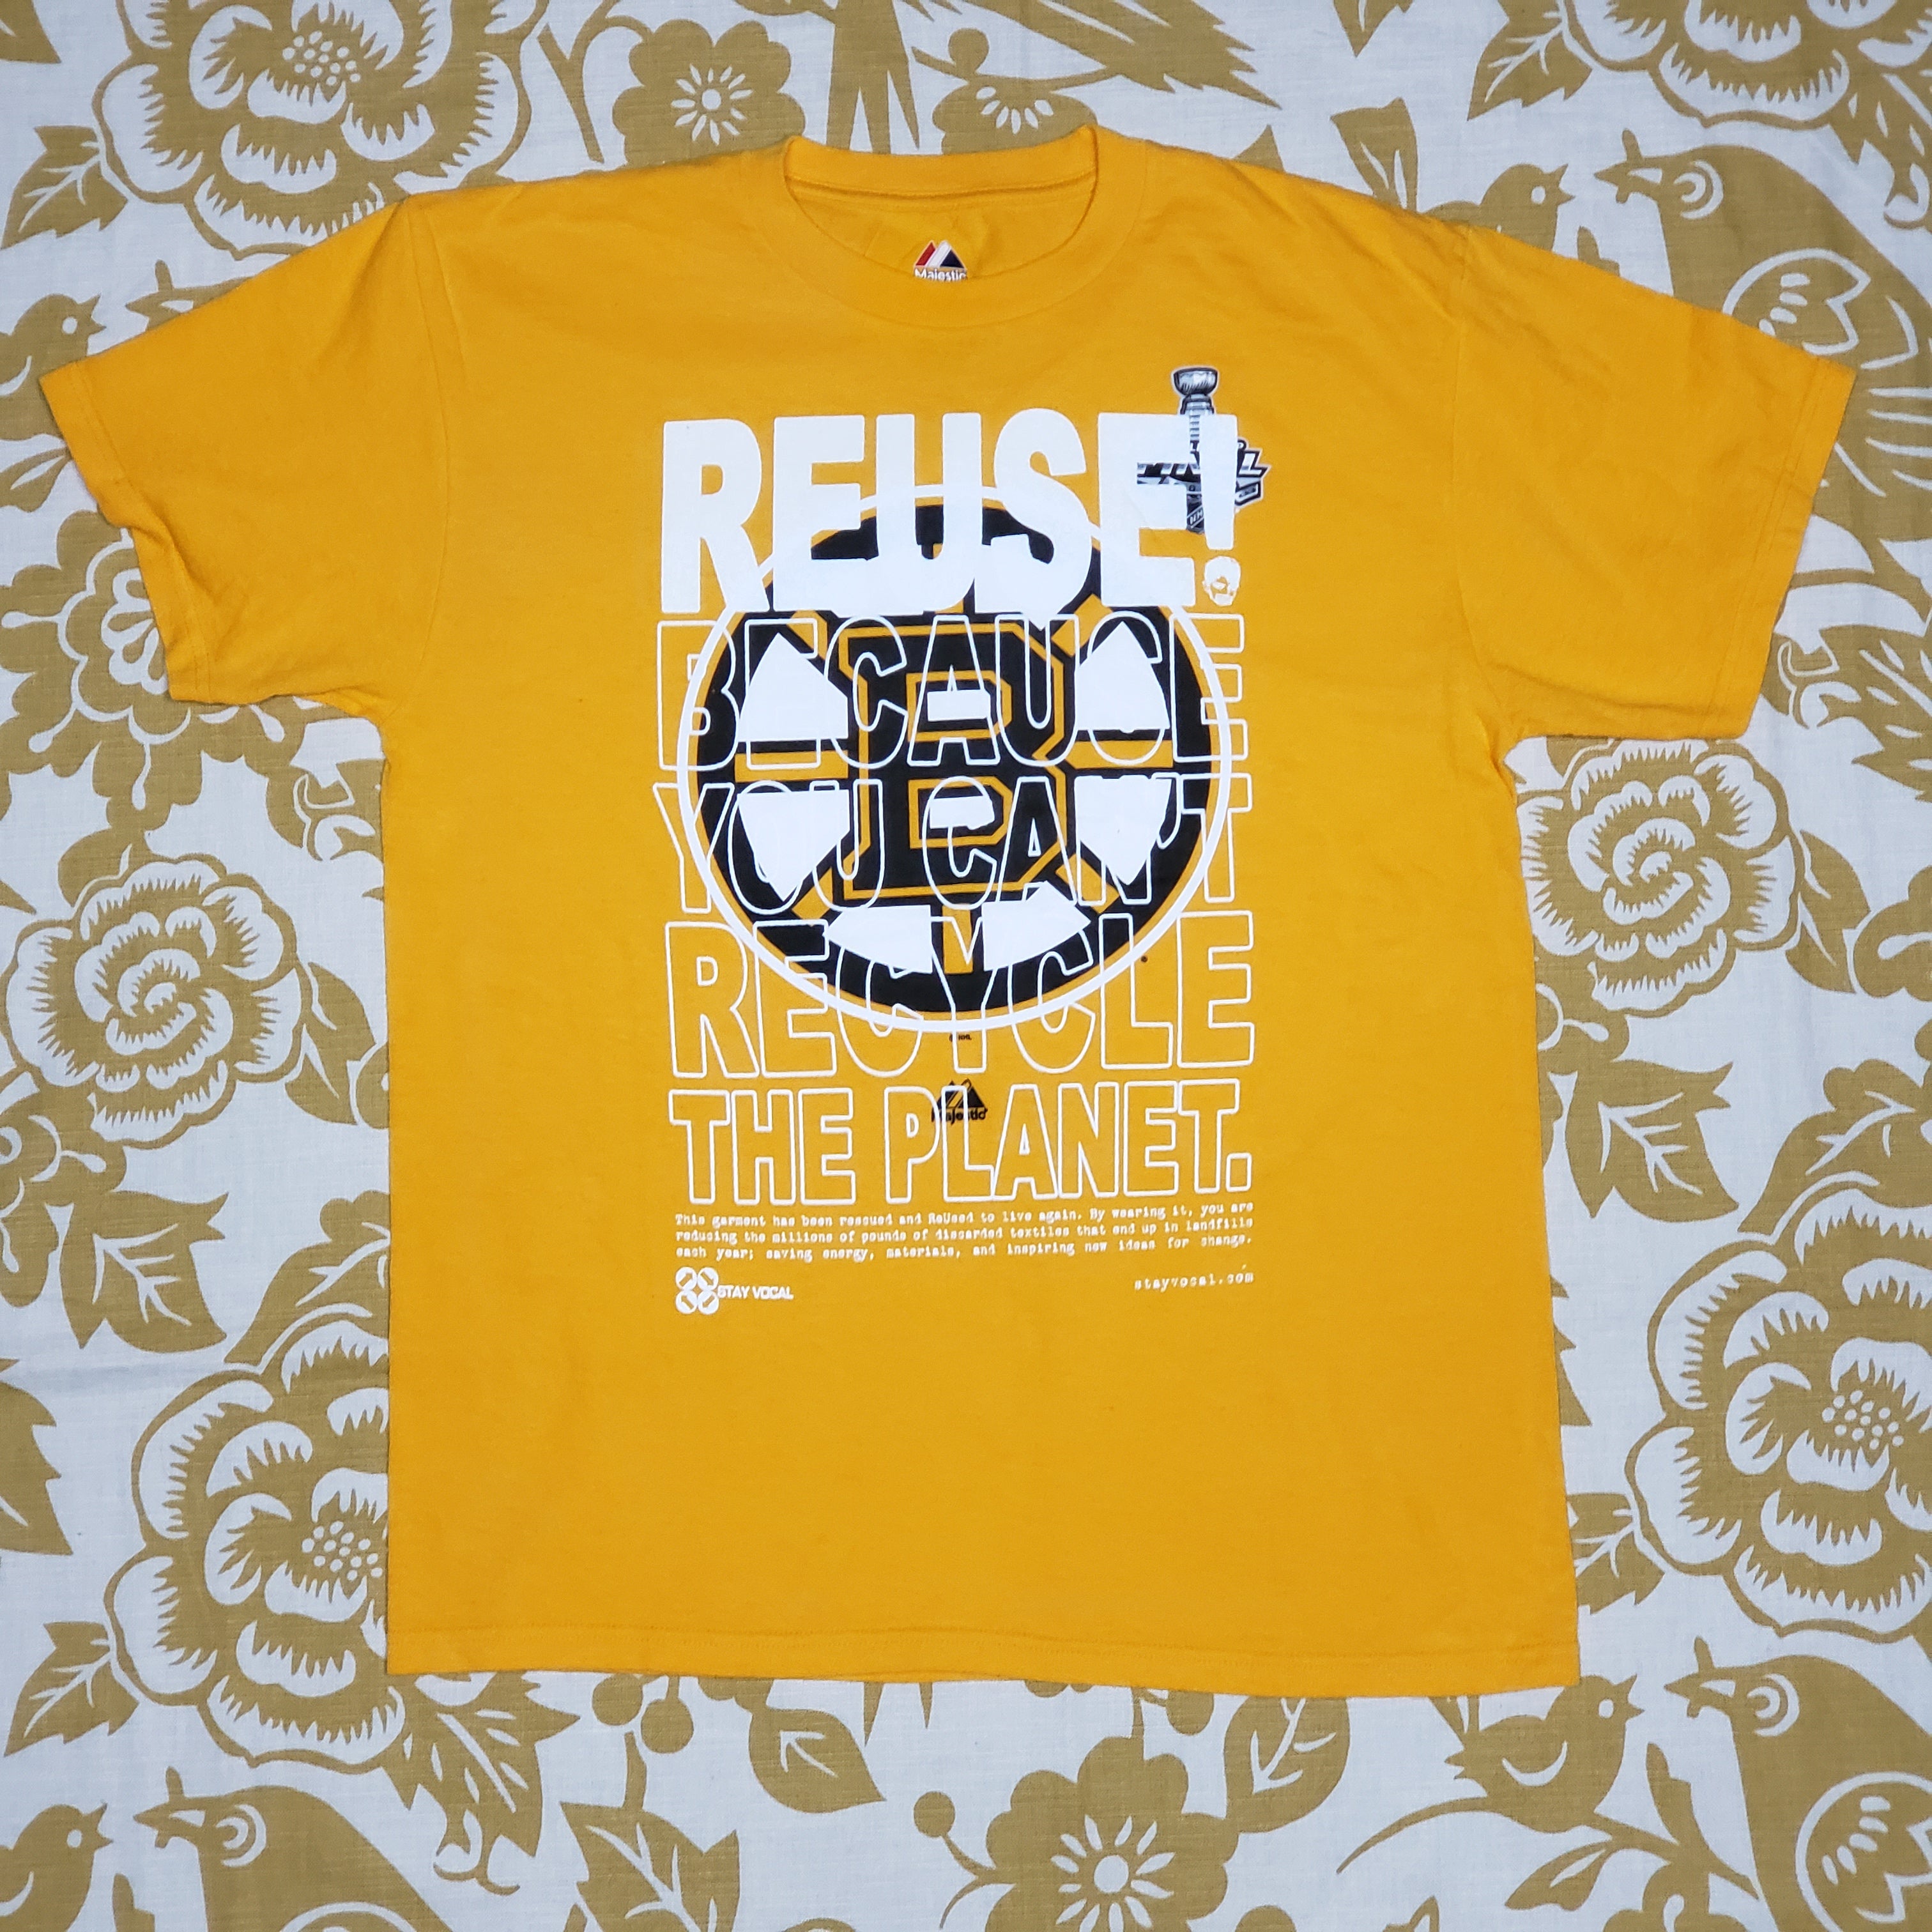 One of a Kind (Men's M) REUSE! Boston Bruins 2011 T-Shirt